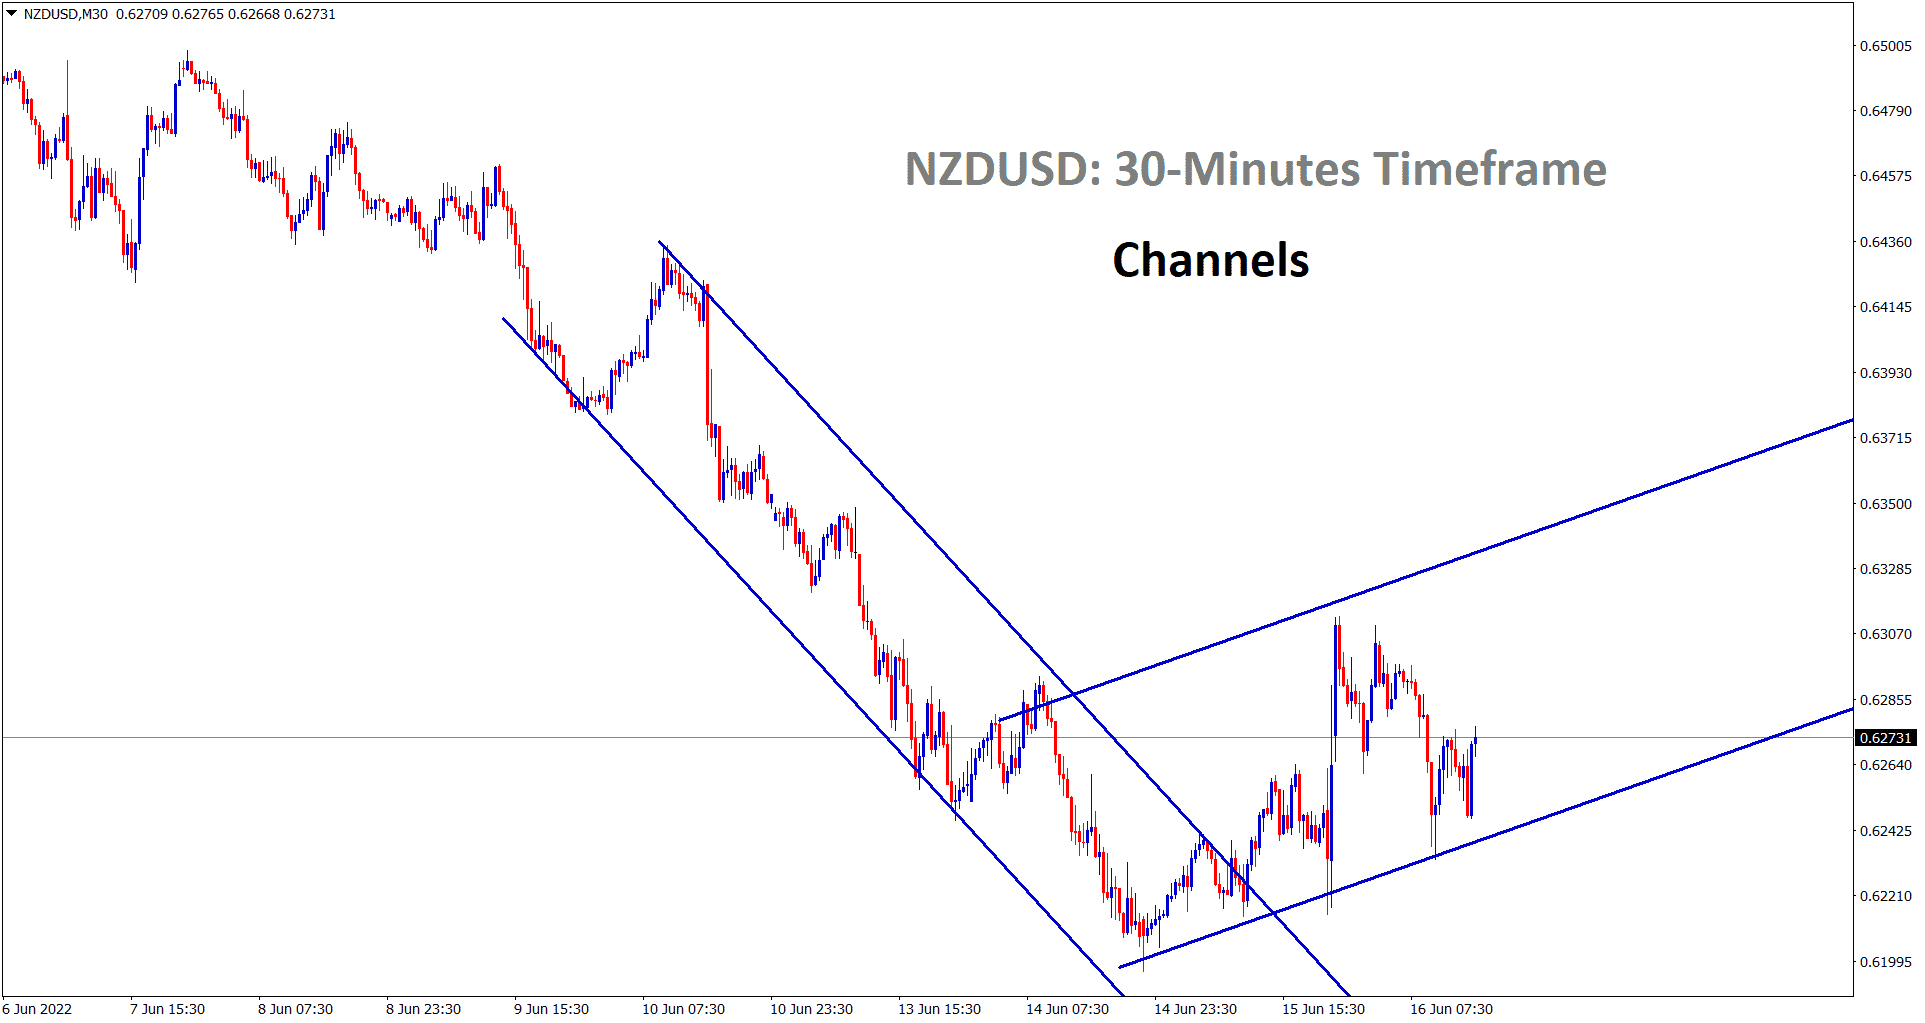 NZDUSD is moving between the channel ranges now moving in an ascending channel